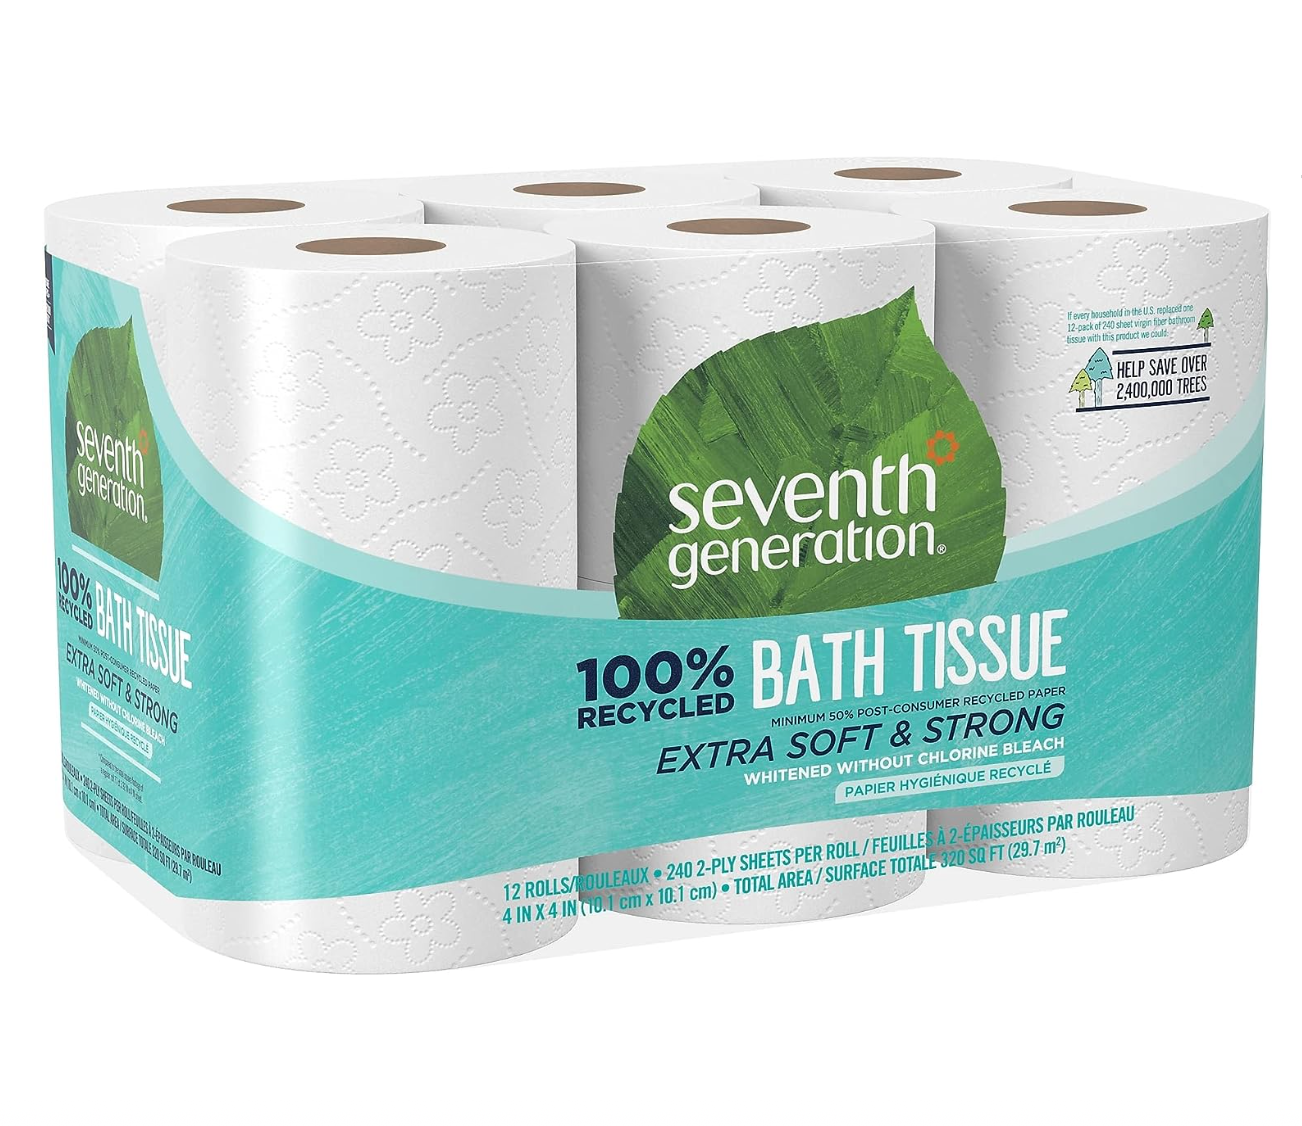 Seventh Generation Bath Tissue, 240 2-ply sheets Extra Soft & Strong Double Rolls, 12 ct